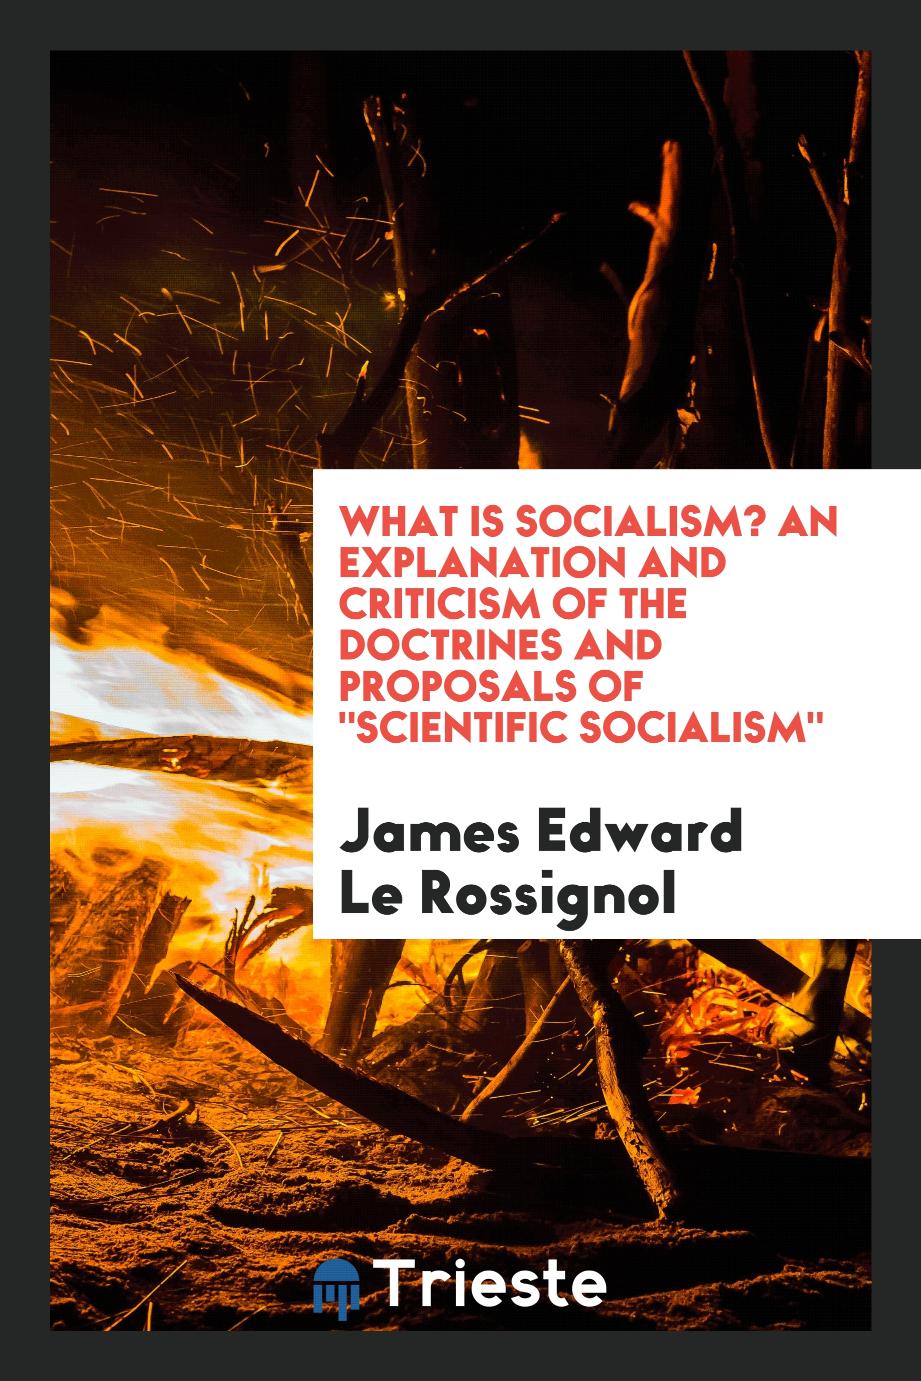 What is socialism? An explanation and criticism of the doctrines and proposals of "scientific socialism"